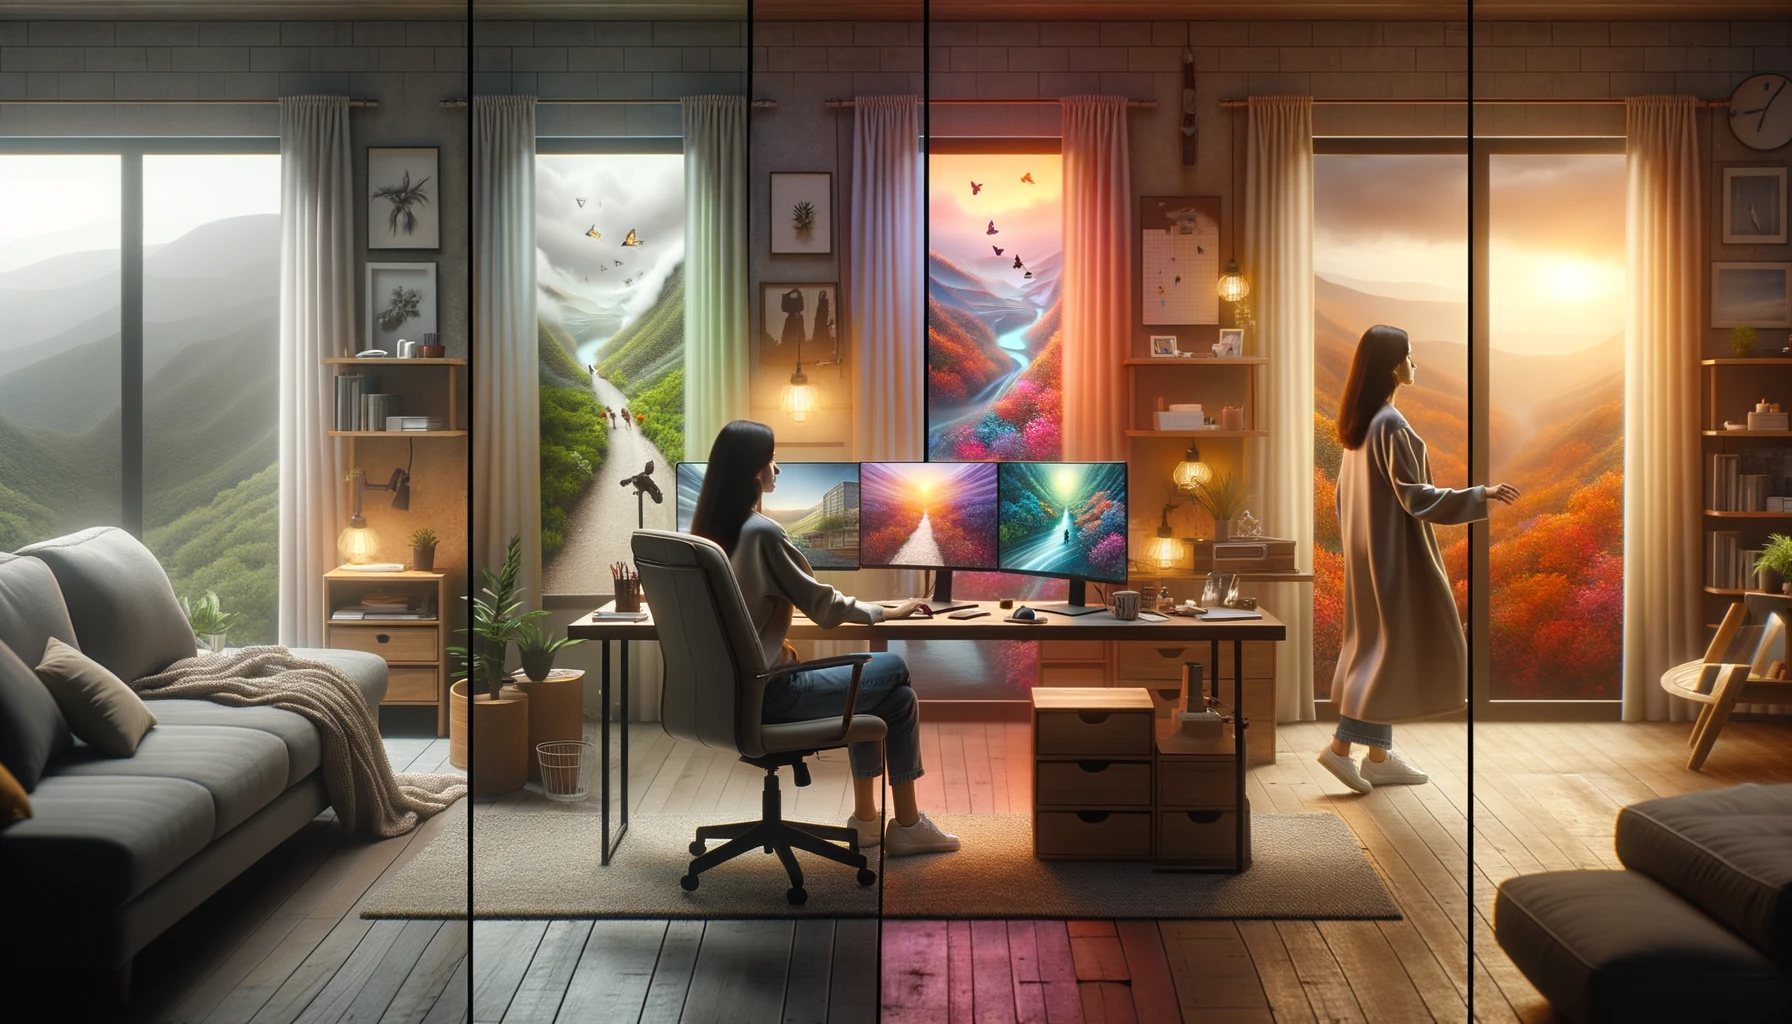 Infographic, Wendy Kier, AI Art, journey capturing a woman's transformation in her home office using AI visuals for mood tracking.